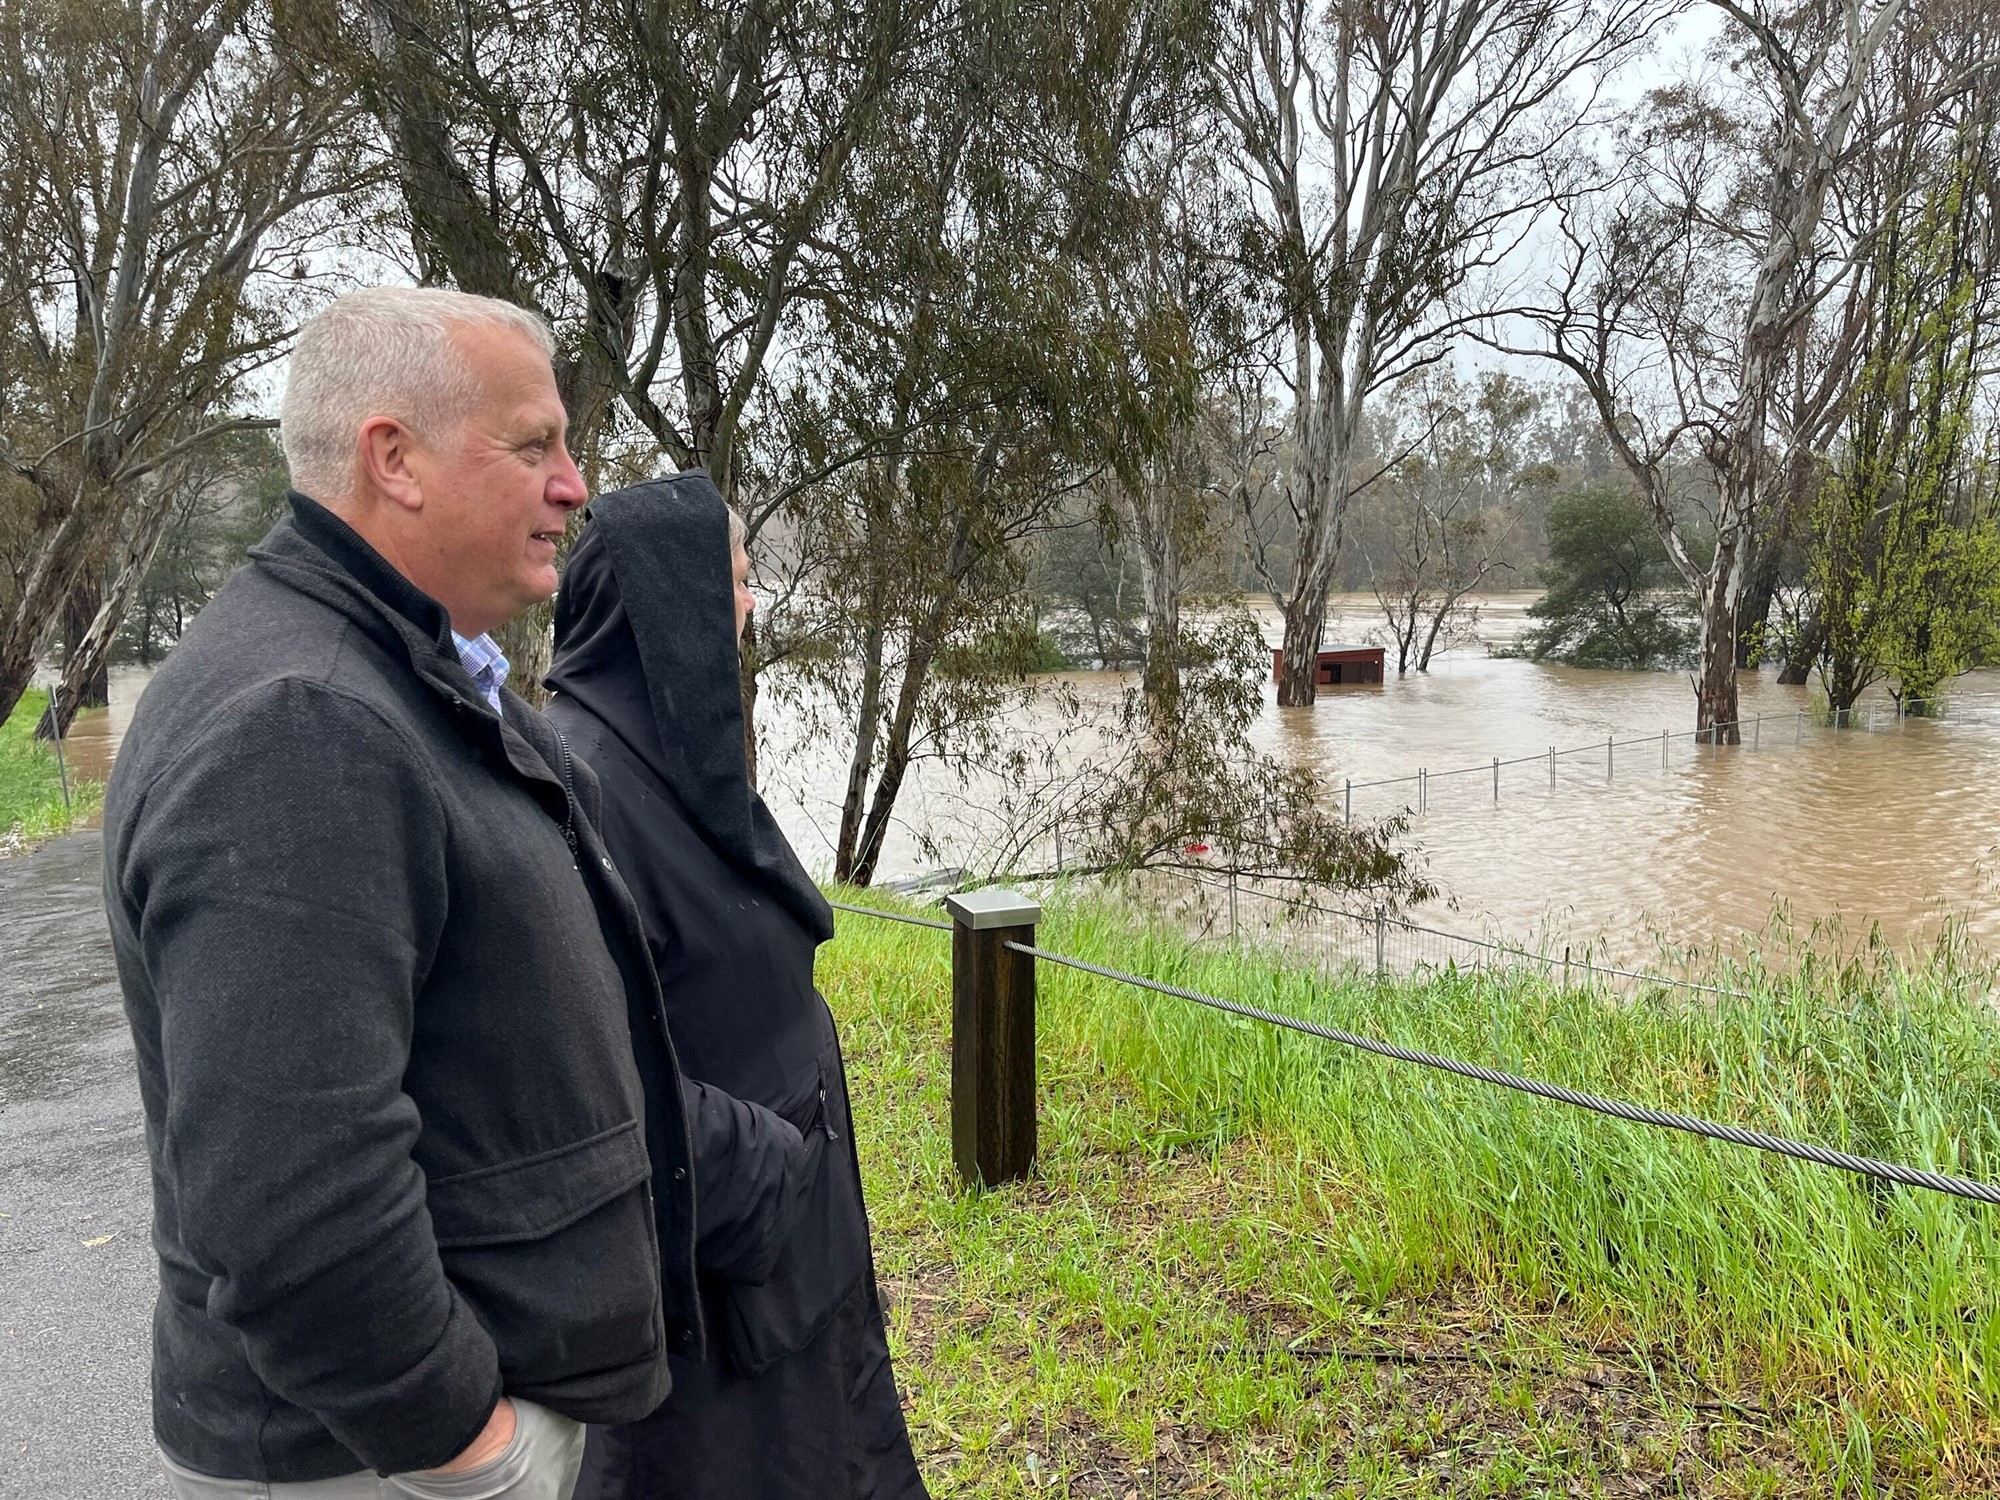 Picture shows Brett and Fiona observing the floodwaters.